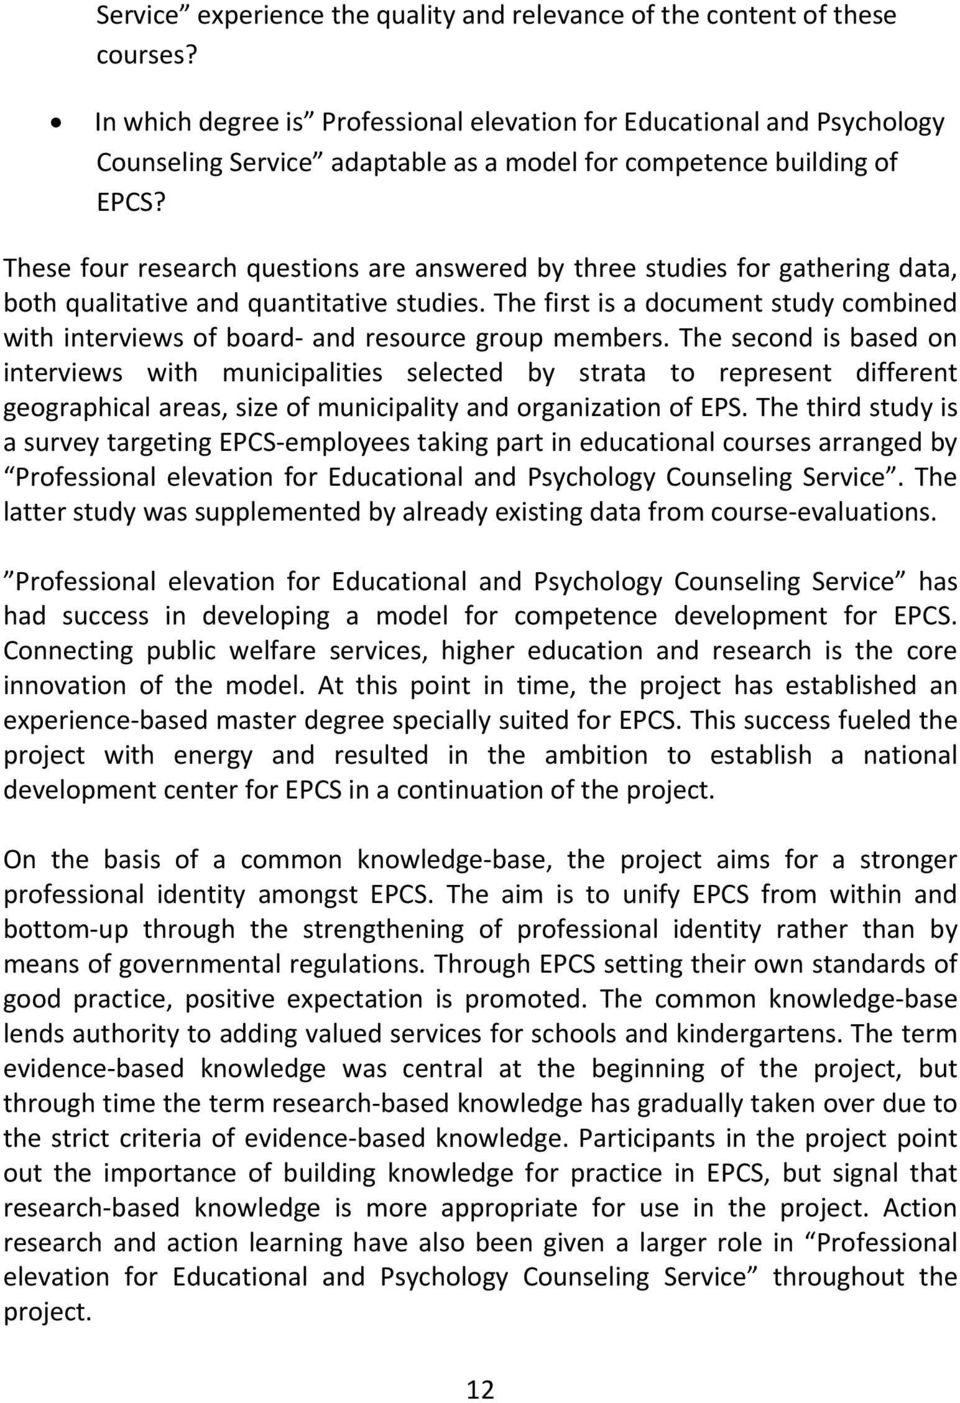 These four research questions are answered by three studies for gathering data, both qualitative and quantitative studies.